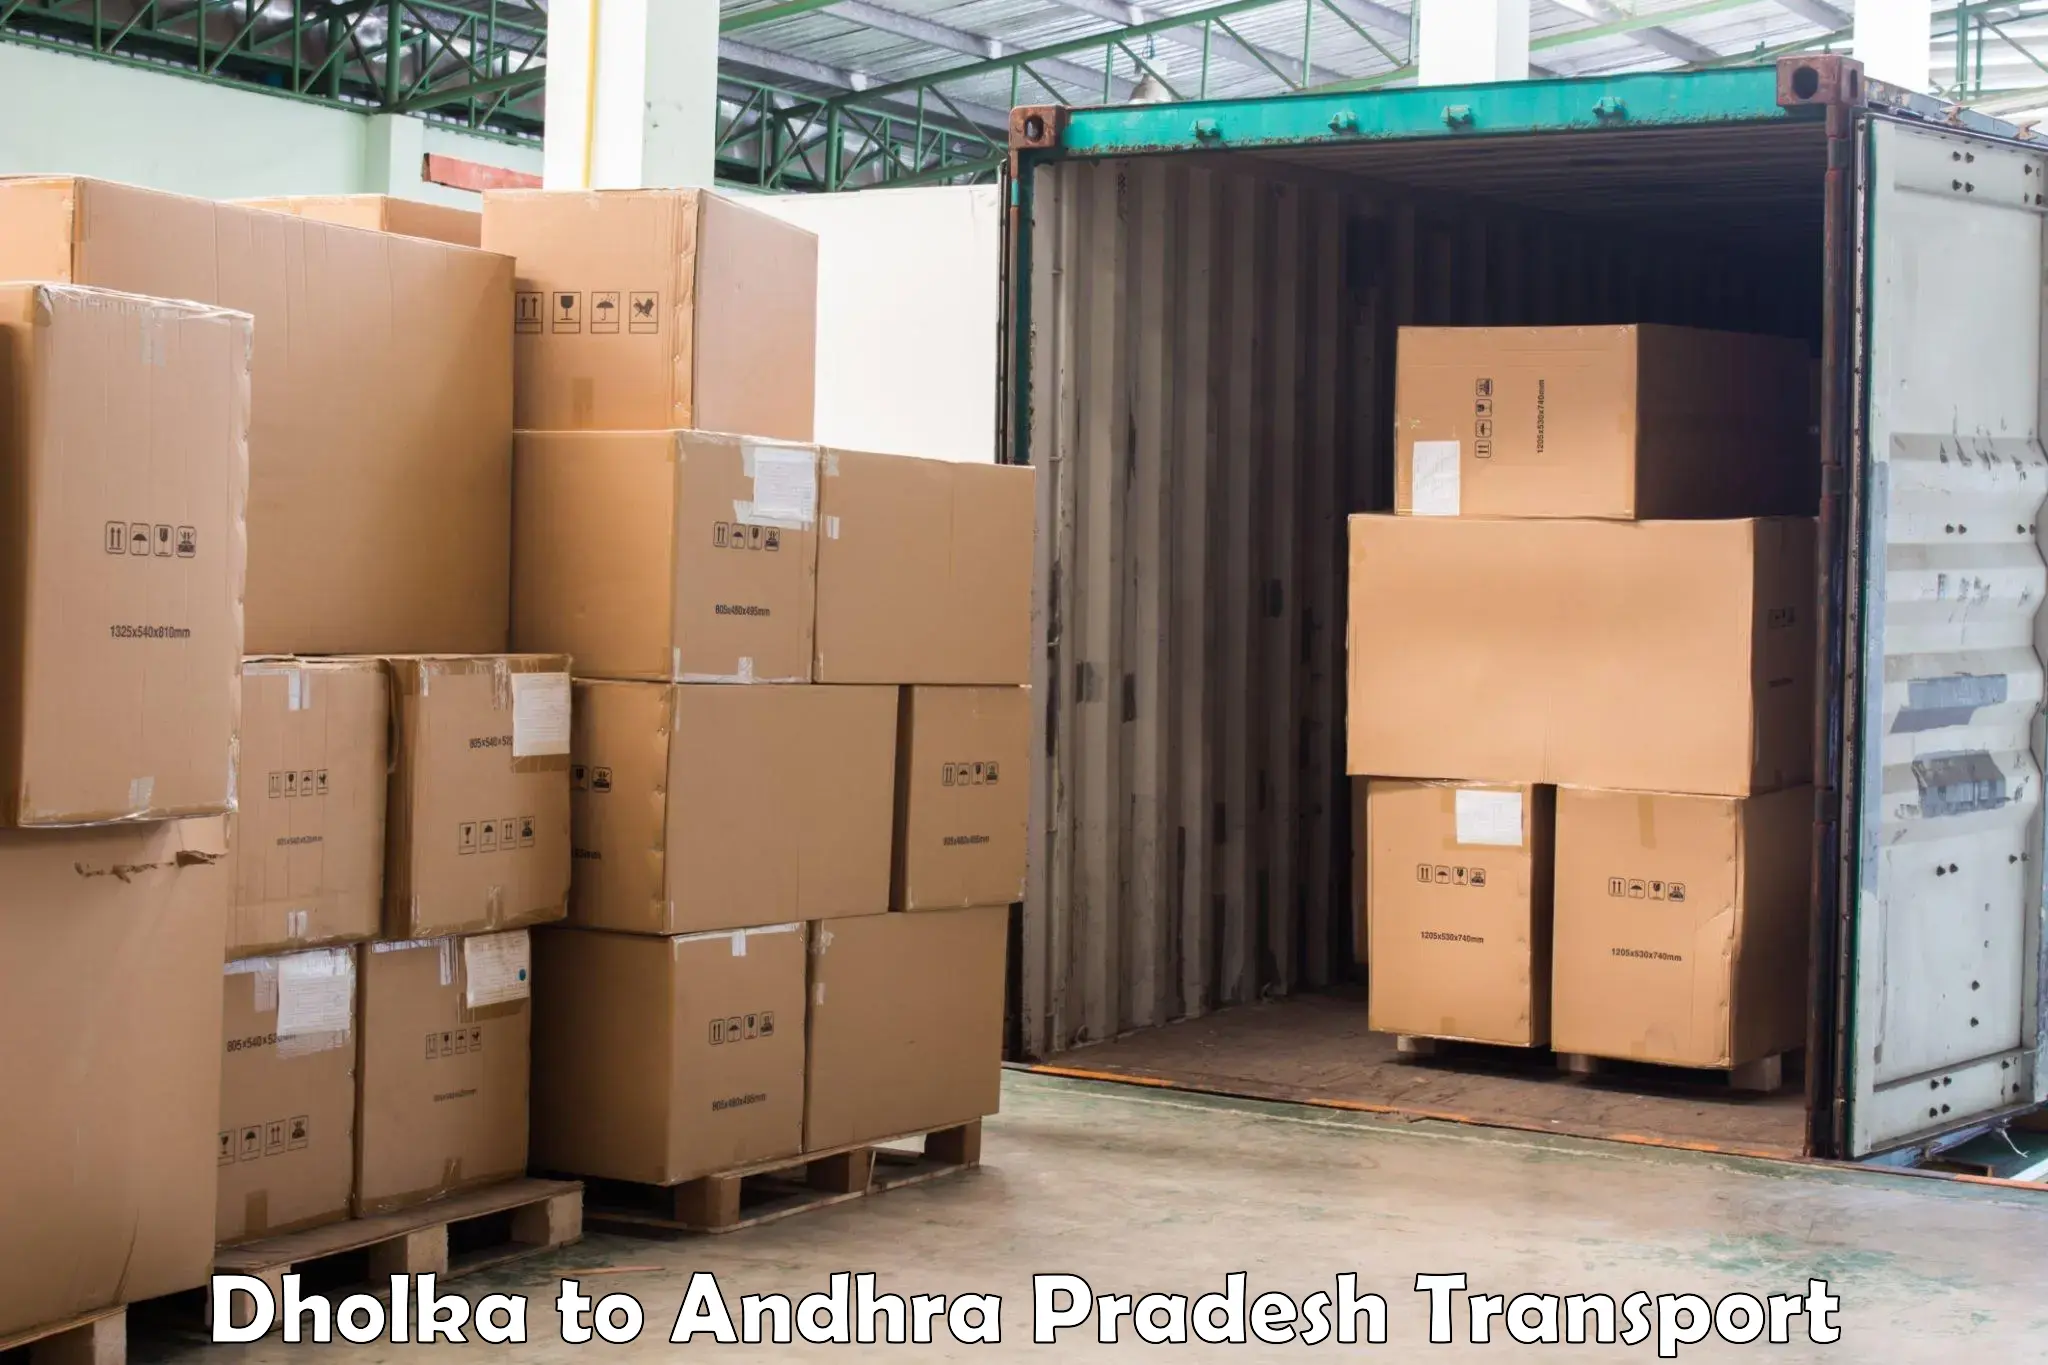 Truck transport companies in India in Dholka to Yerragondapalem